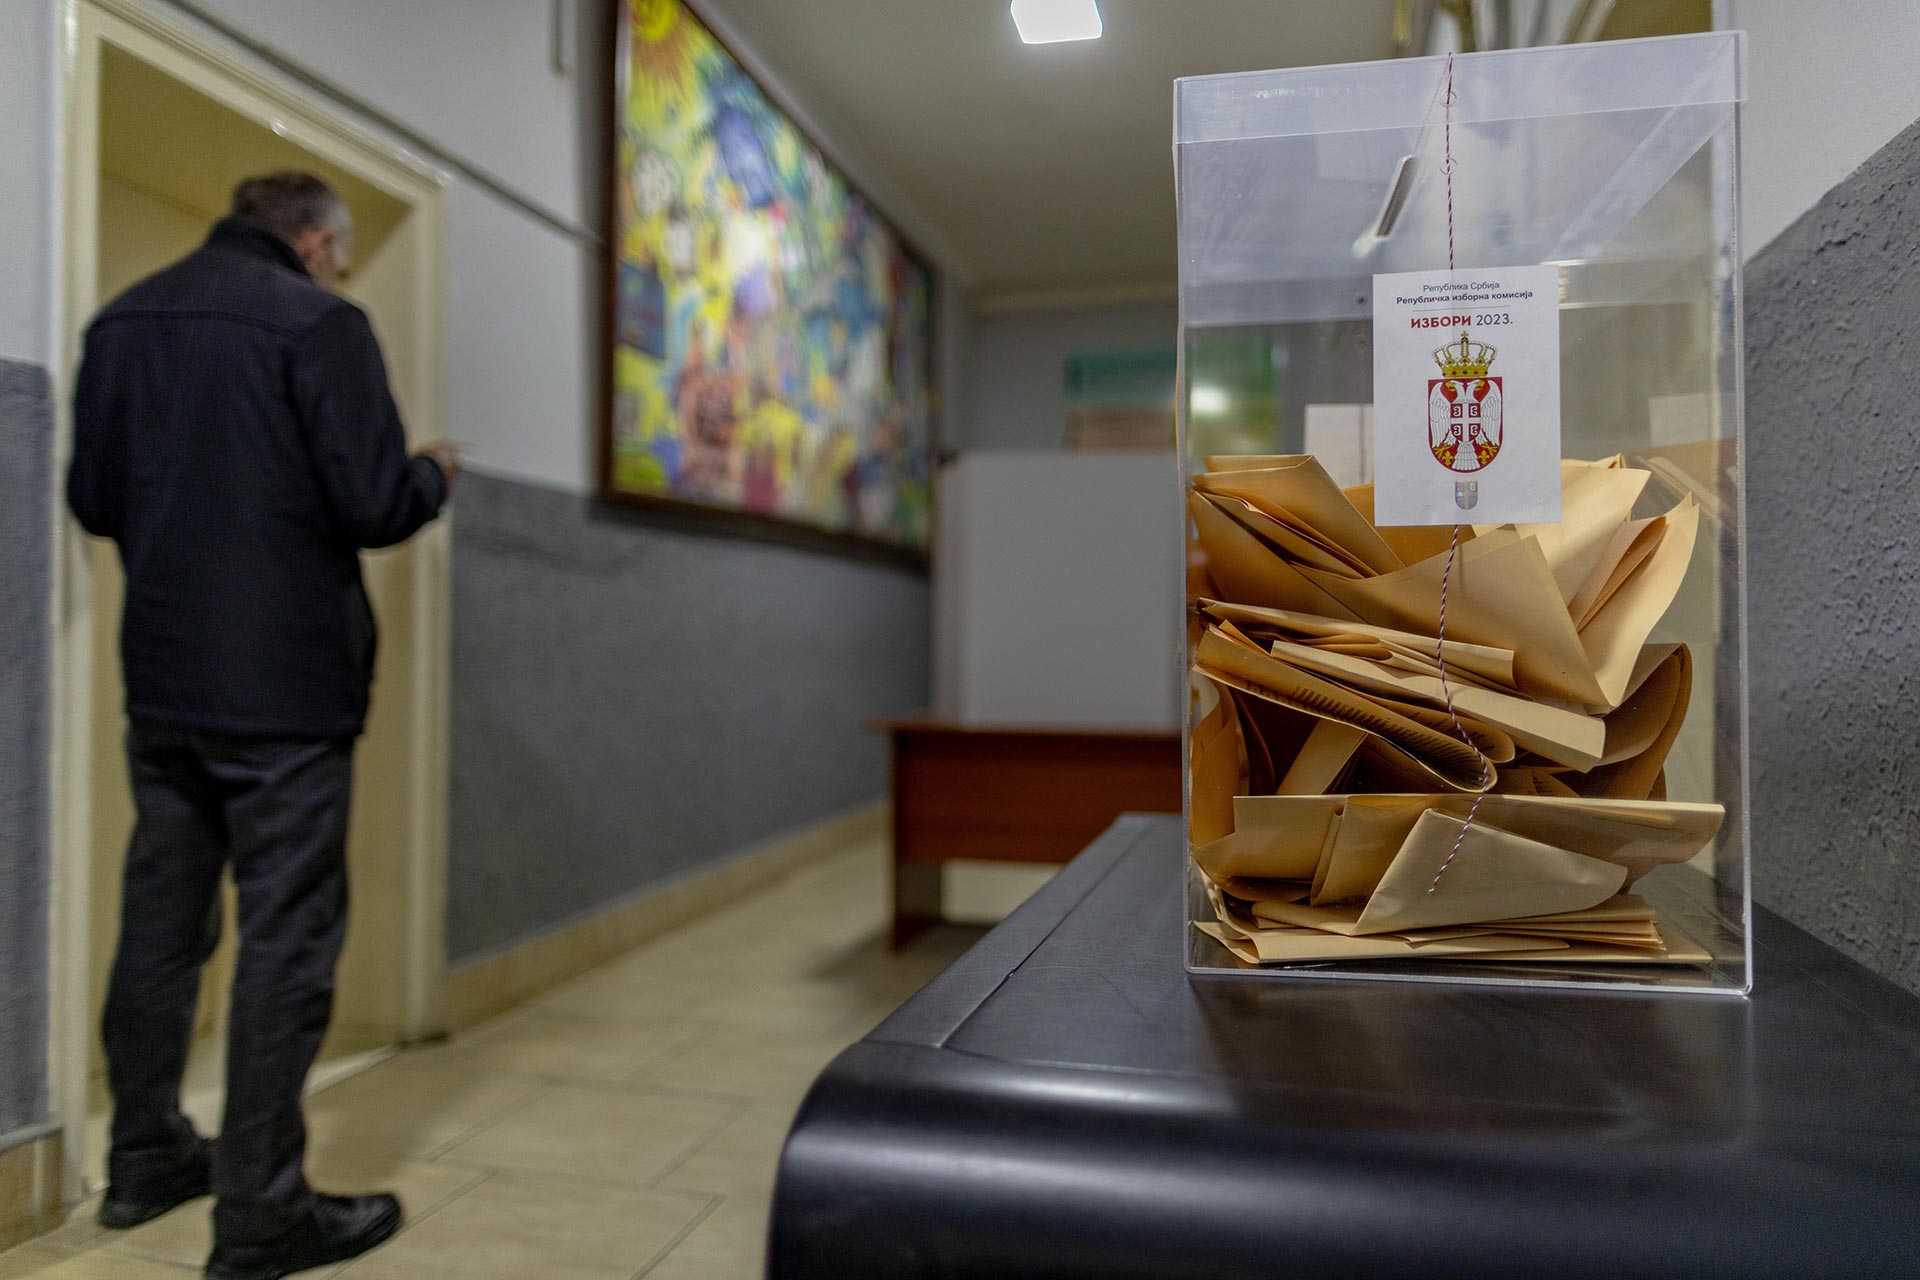  As Europe Urges ‘Reform’ in Serbia, Local Election Observers Point to State Machinery Behind Vote Rigging